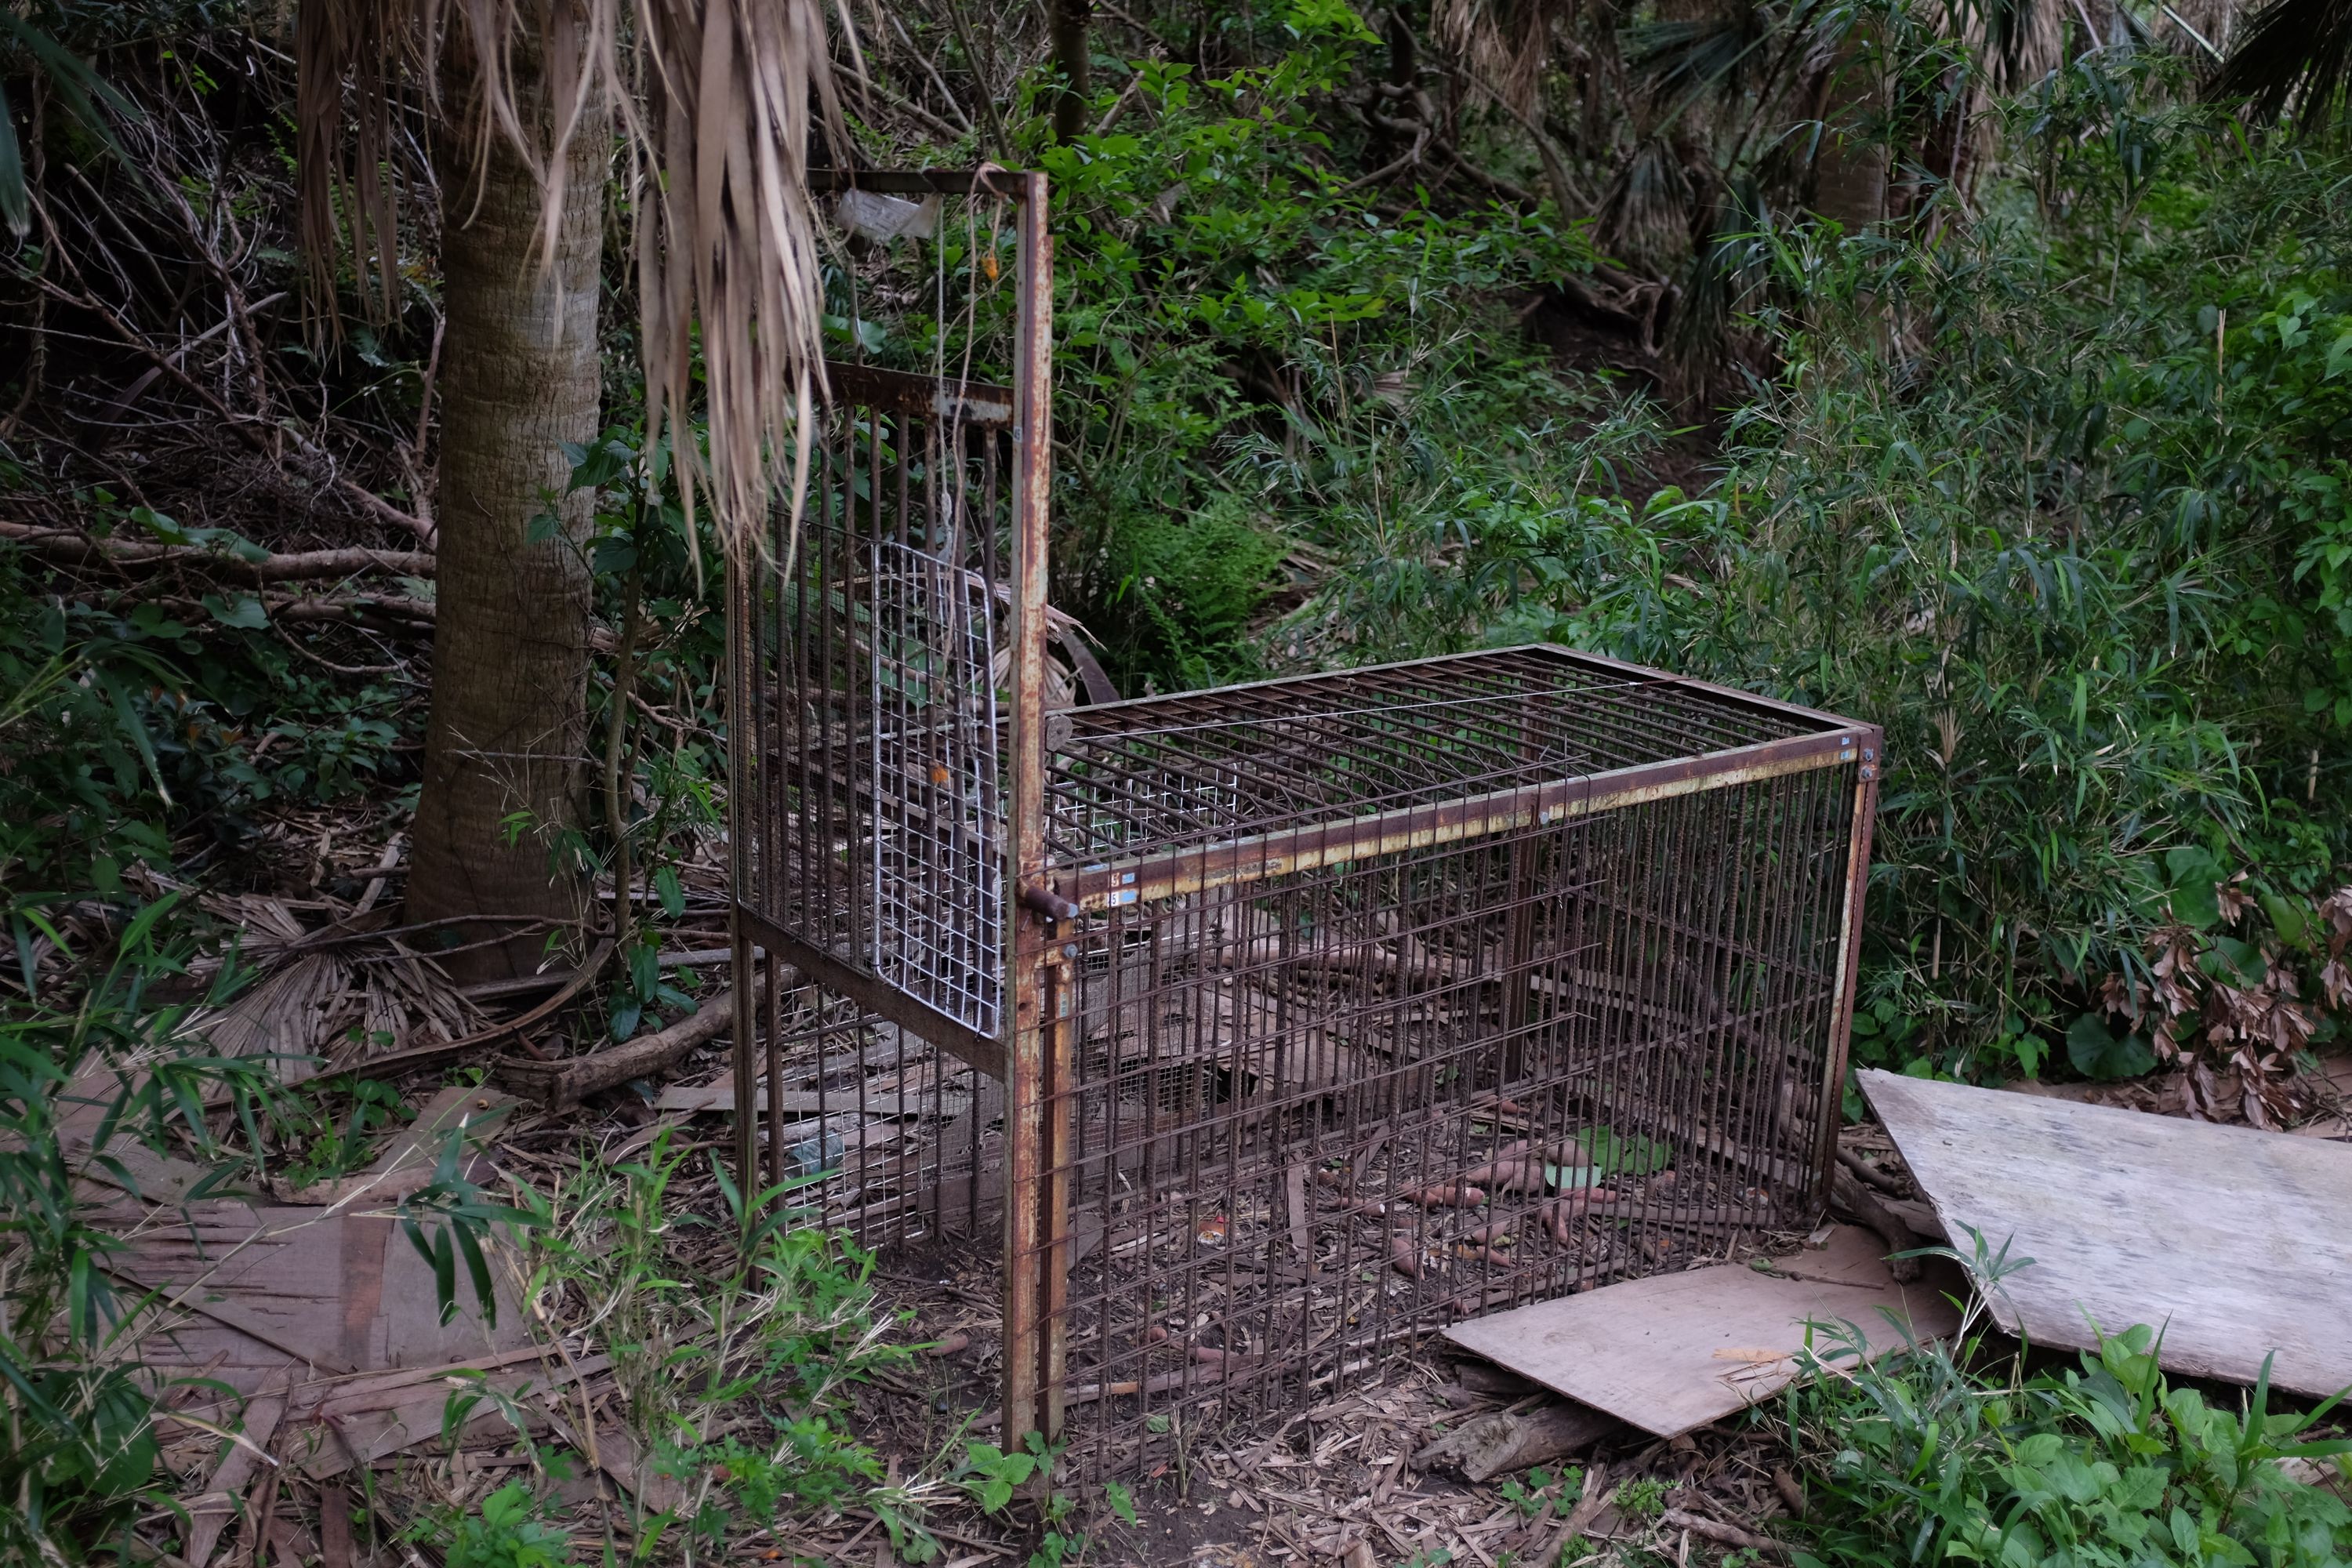 An empty animal trap in the jungle.